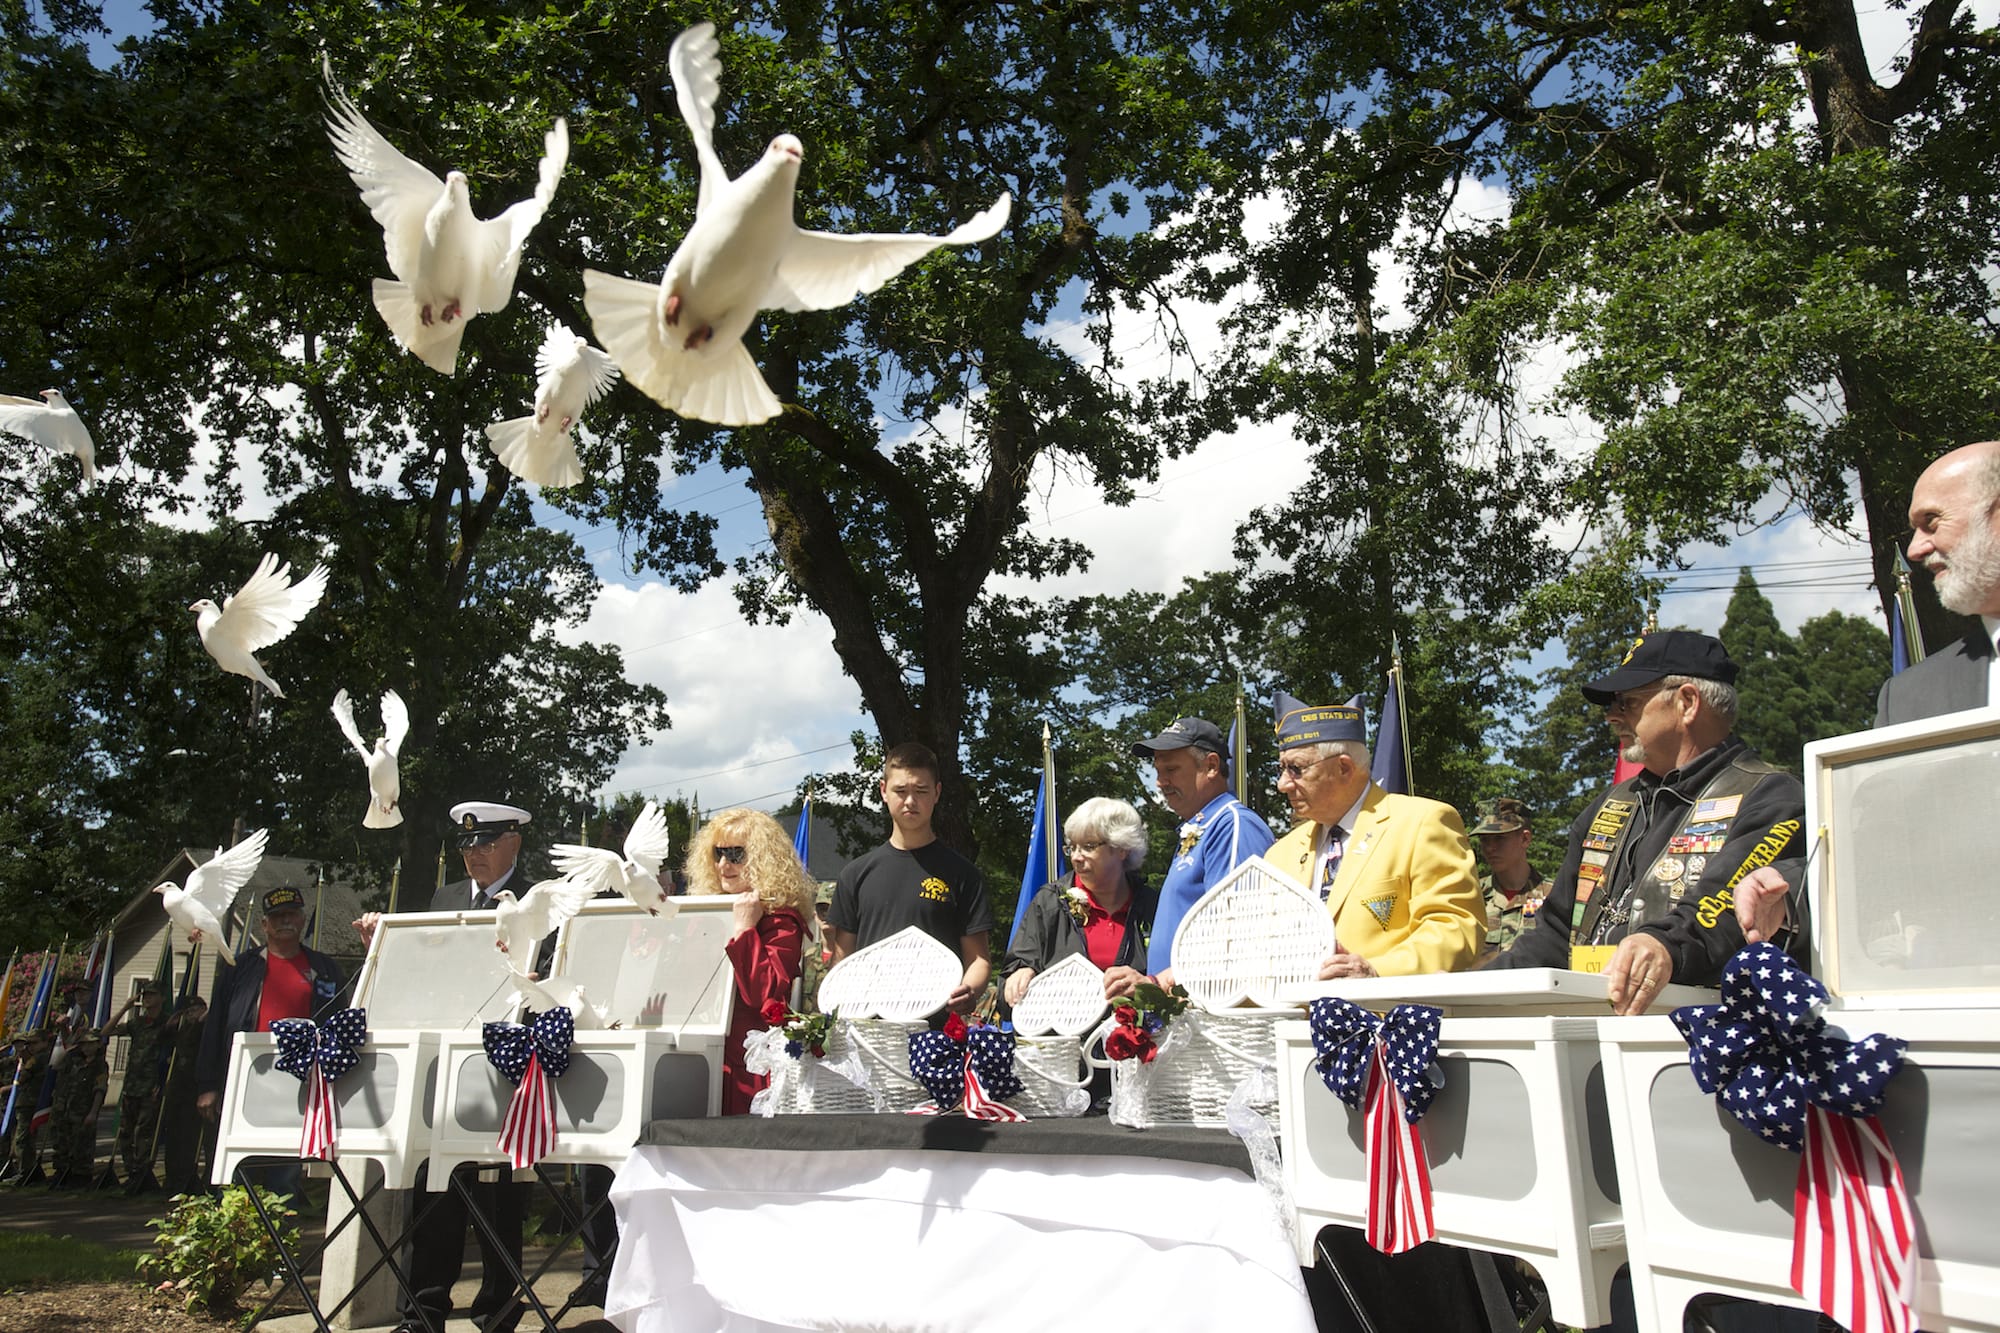 White doves are released Monday in memory of those who died in the line of duty, including Air Force Capt. Chris Stover, during an observance at the Clark County Veterans War Memorial. Stover died Jan. 7 when his helicopter crashed in England during training.